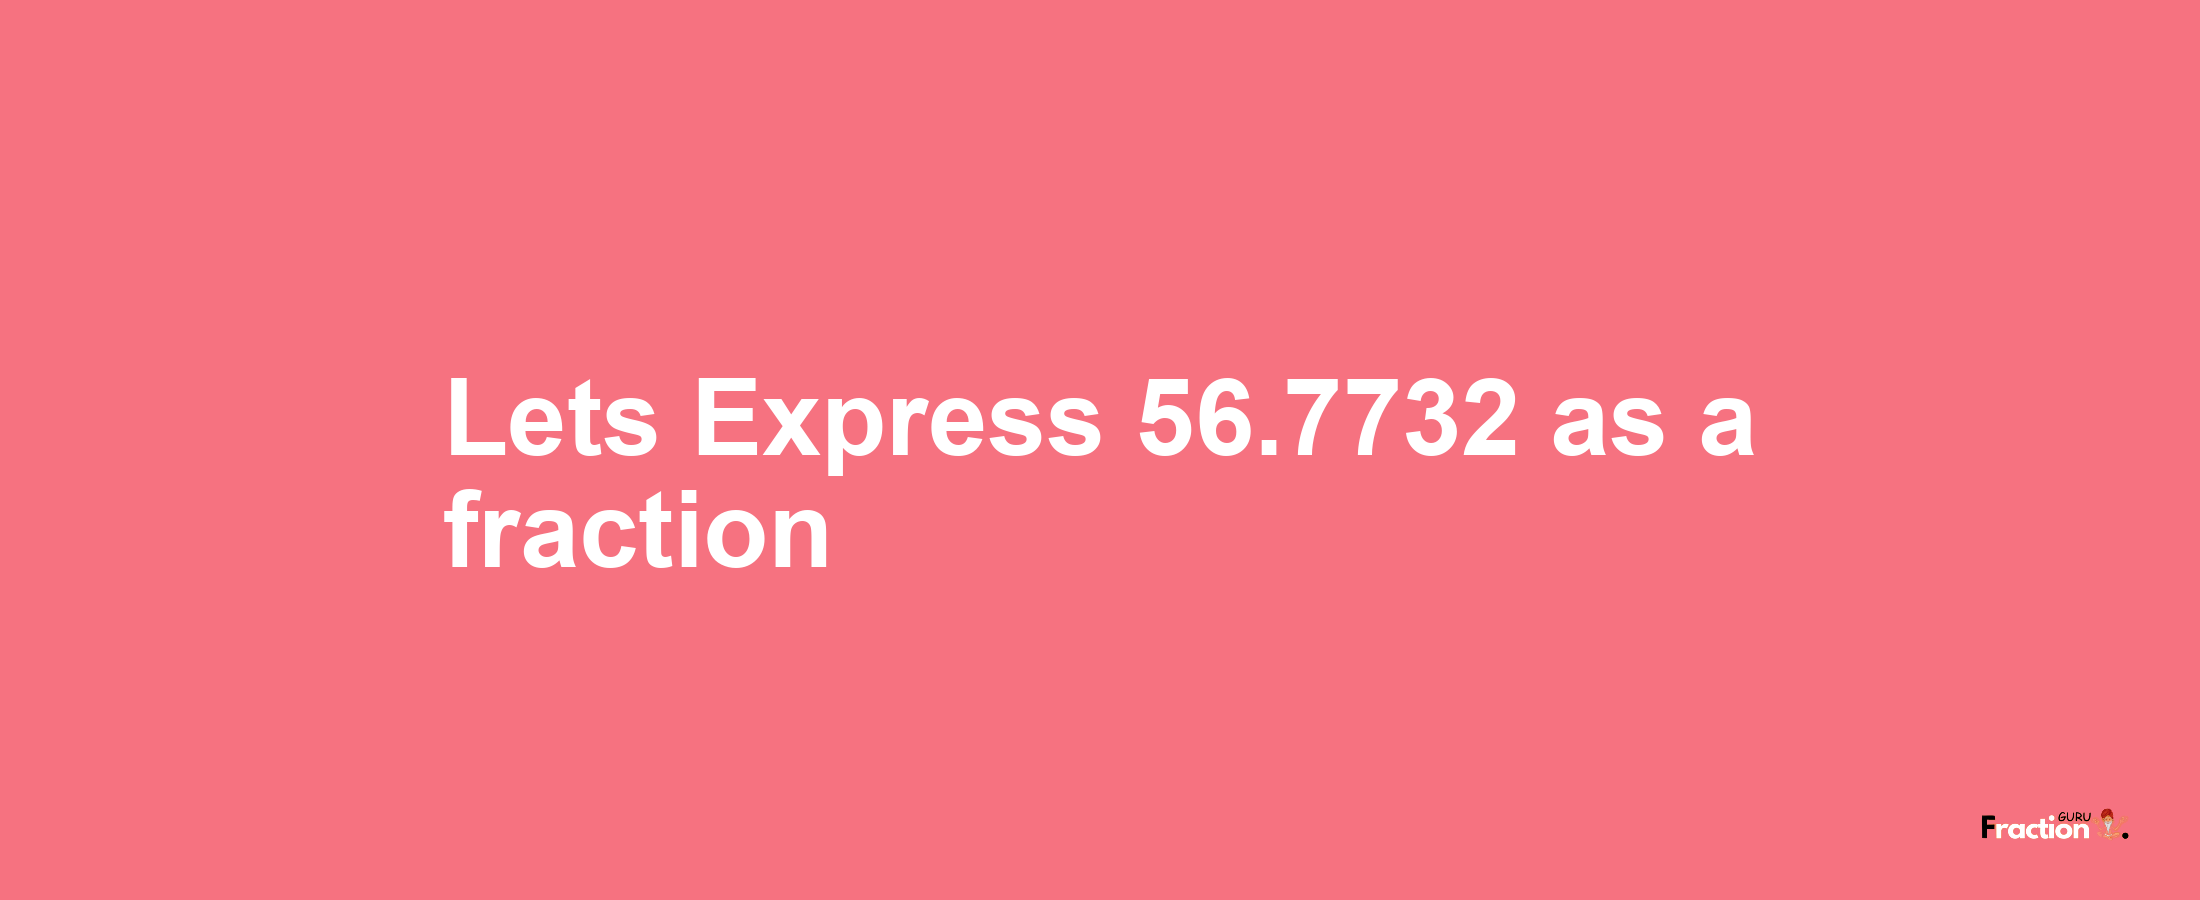 Lets Express 56.7732 as afraction